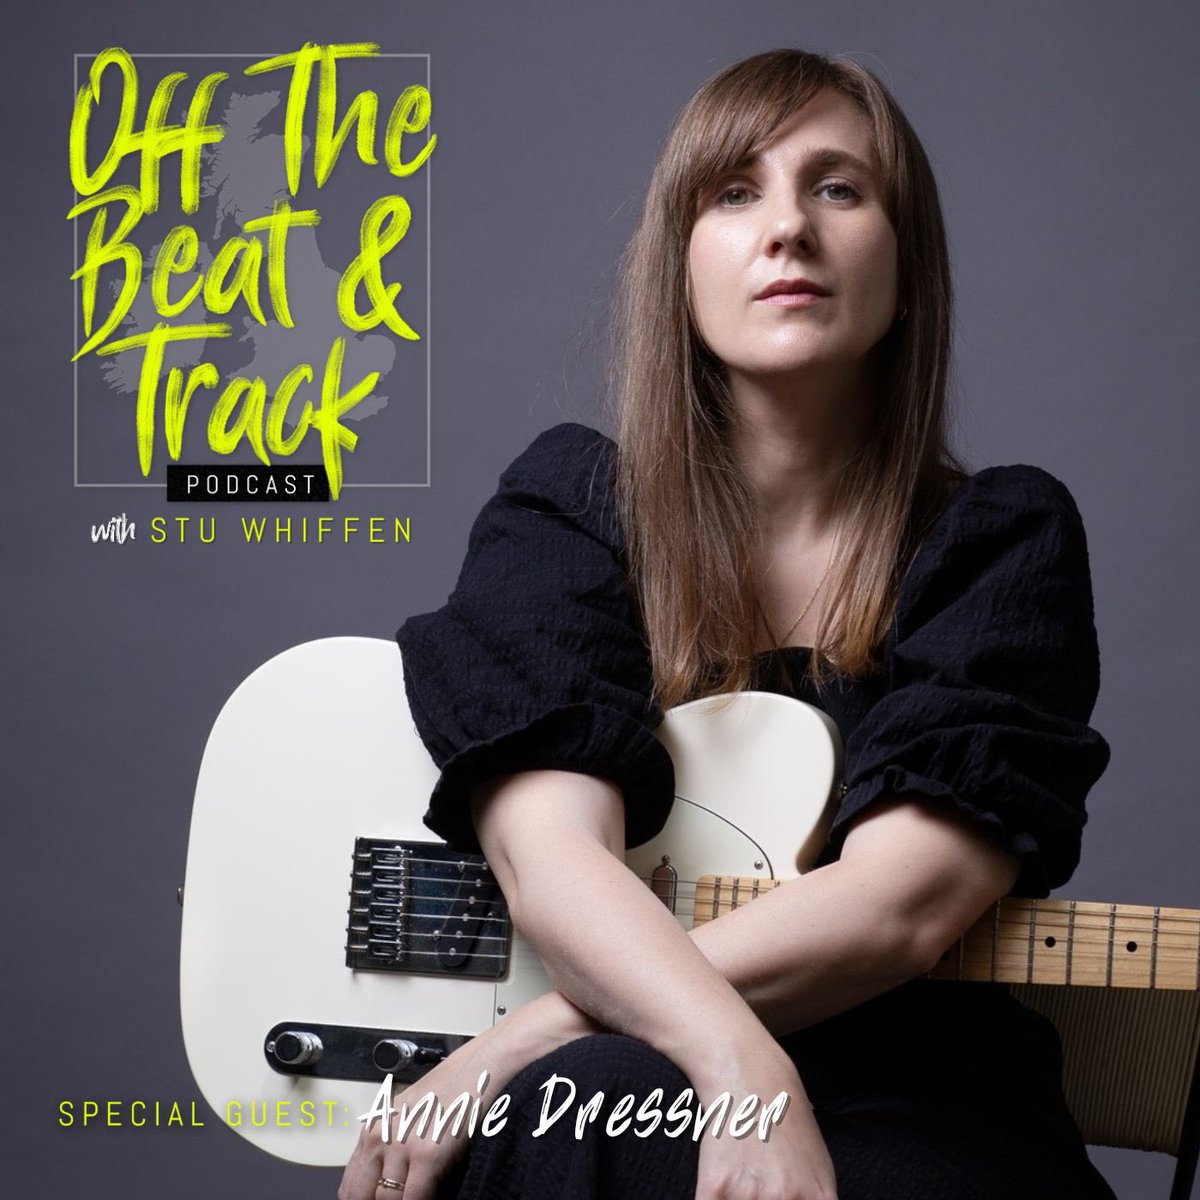 NEW @beatandtrackpod EPISODE Catch host @stuwhiffen chat to the delightful @AnnieDressner about music and more Link in bio or open.spotify.com/episode/3SIQ8Q…